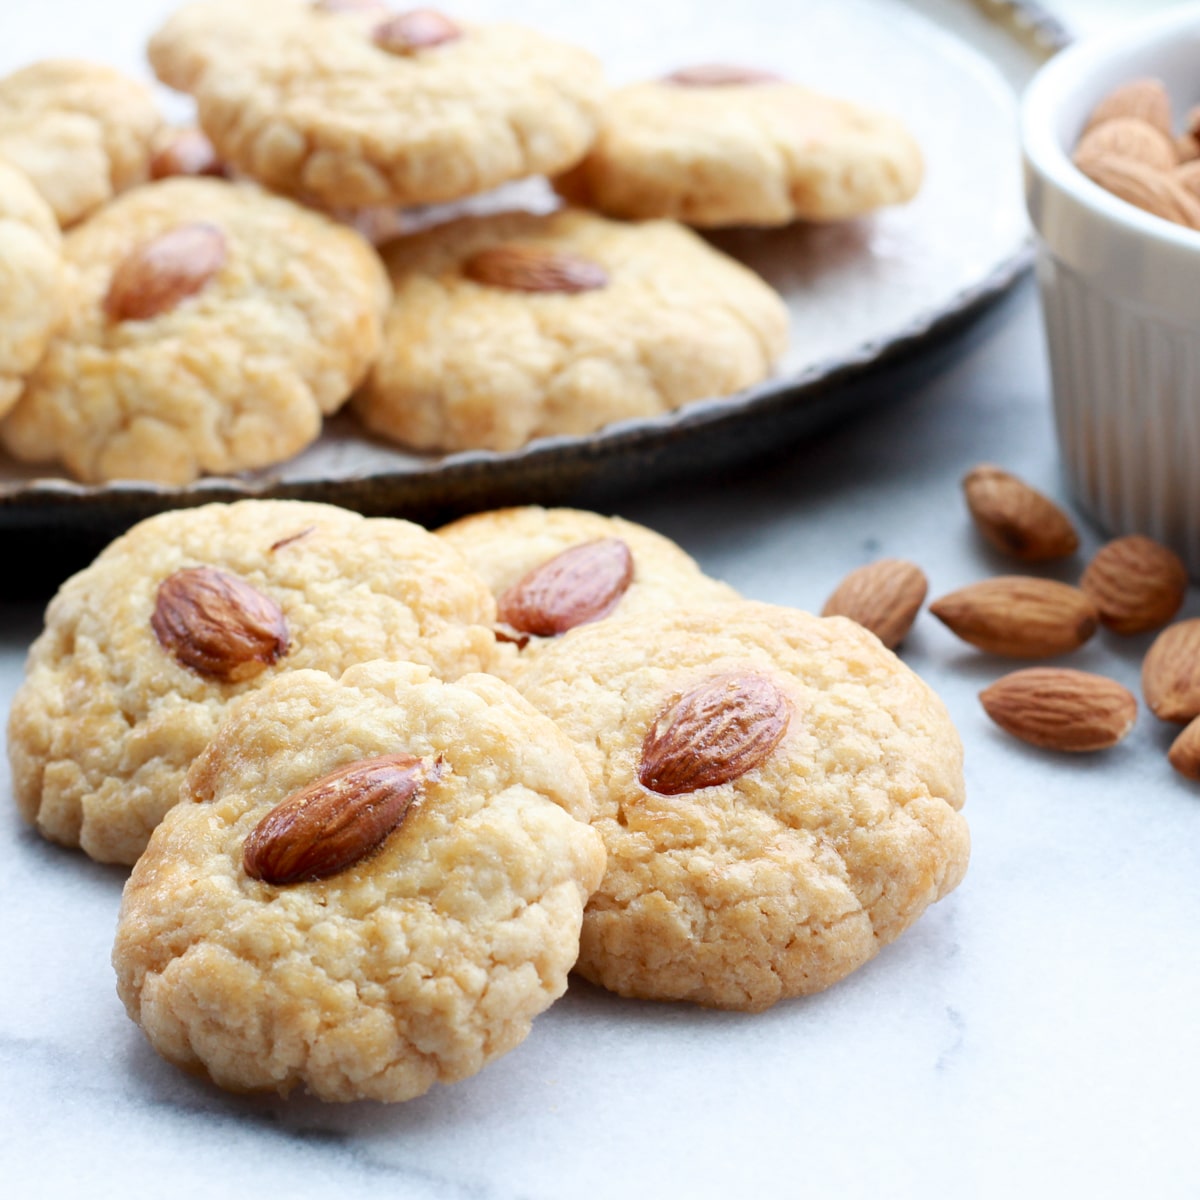 Chinese almond cookies stacked on a round plate, with a small bowl of whole almonds on the side.